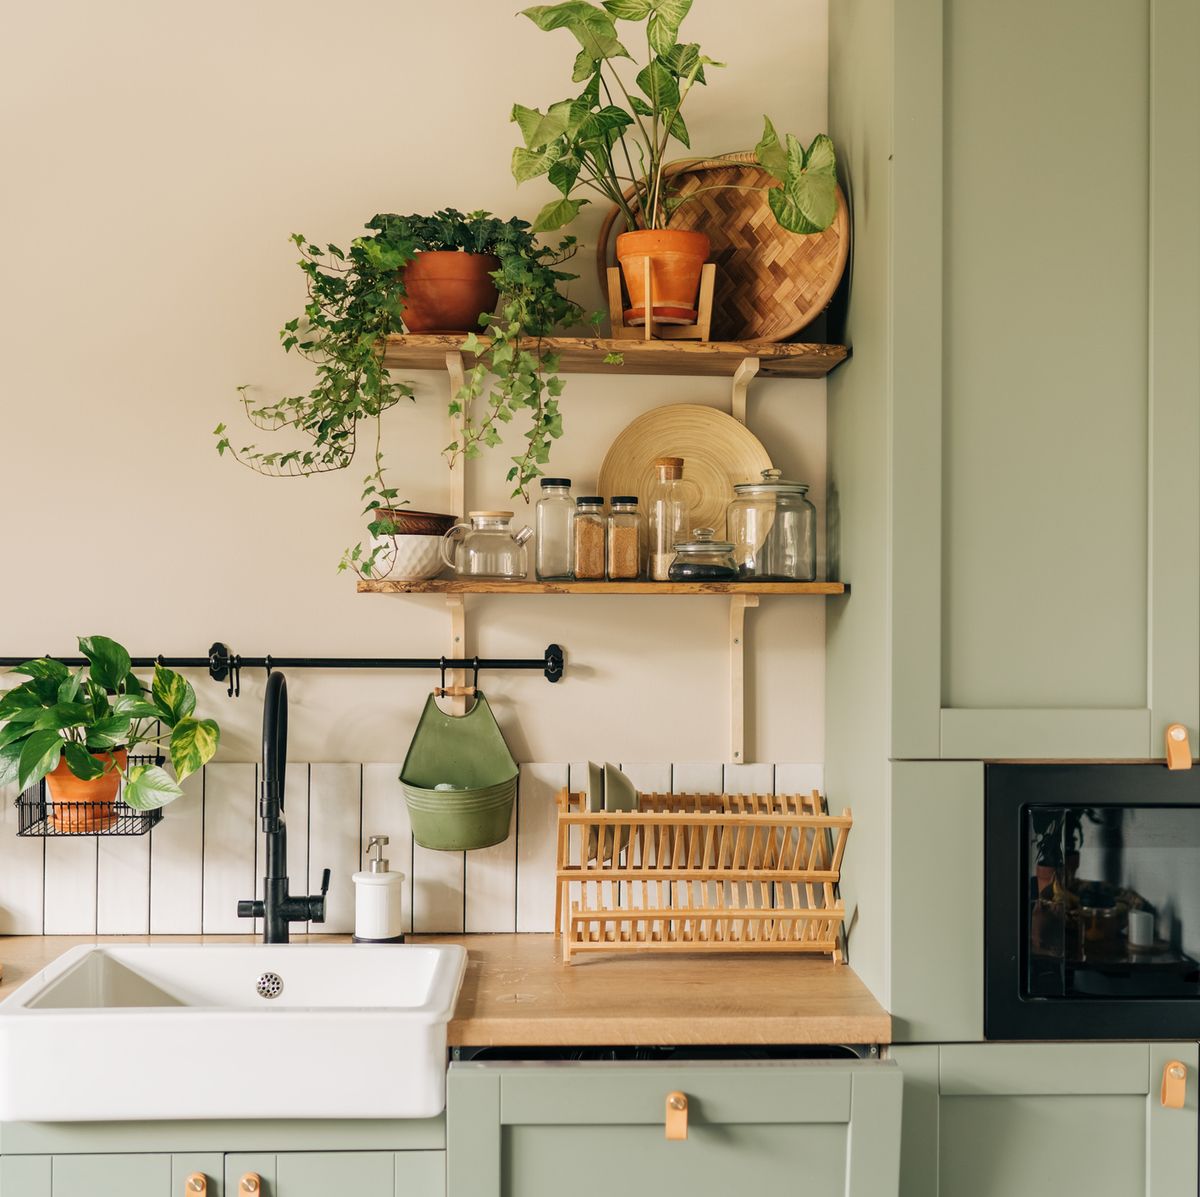 Transform Your Kitchen with Indoor Plants Decor